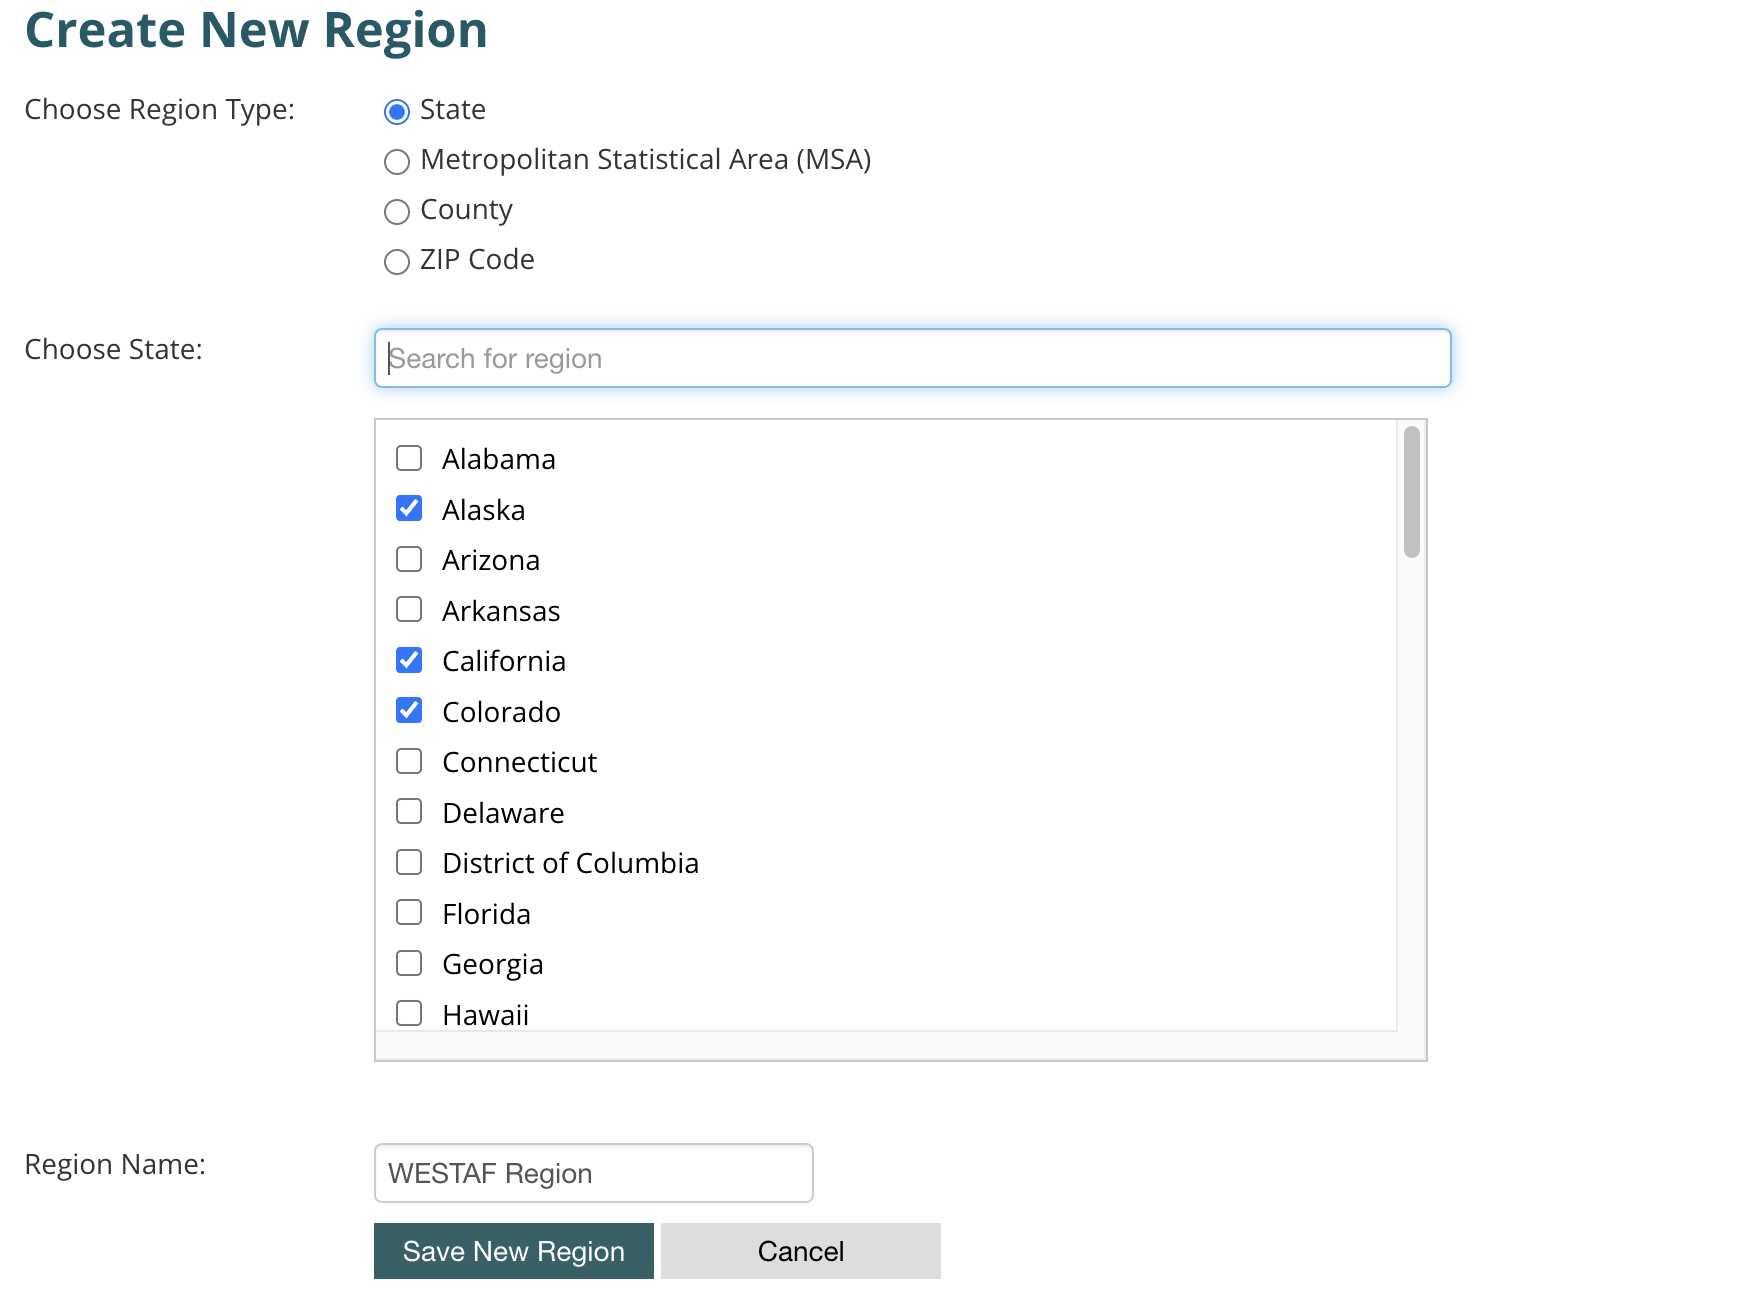 Screenshot of the new region creation page with a list of regions, a space to name the region and the save button.